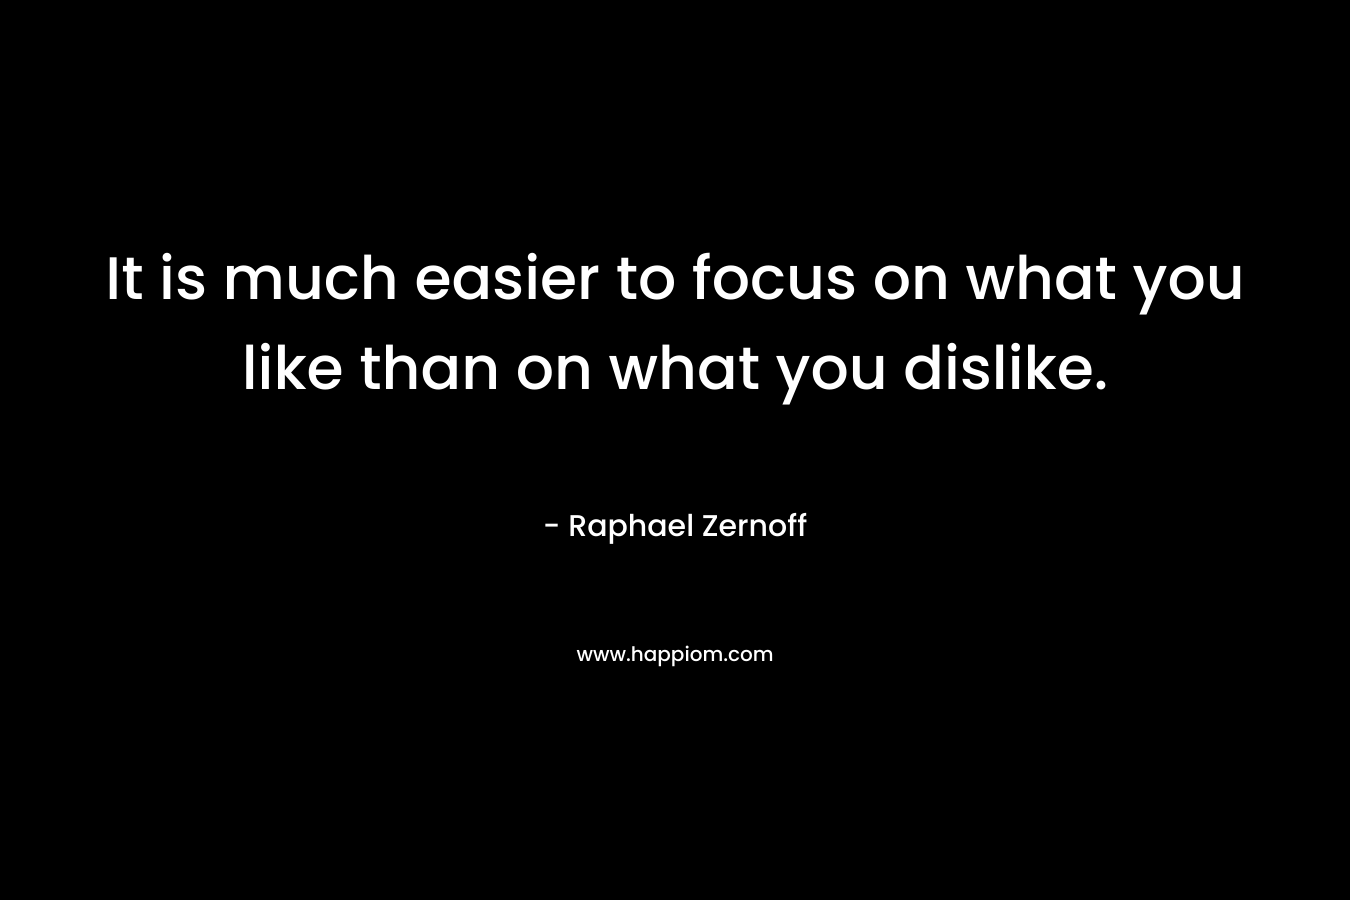 It is much easier to focus on what you like than on what you dislike. – Raphael Zernoff